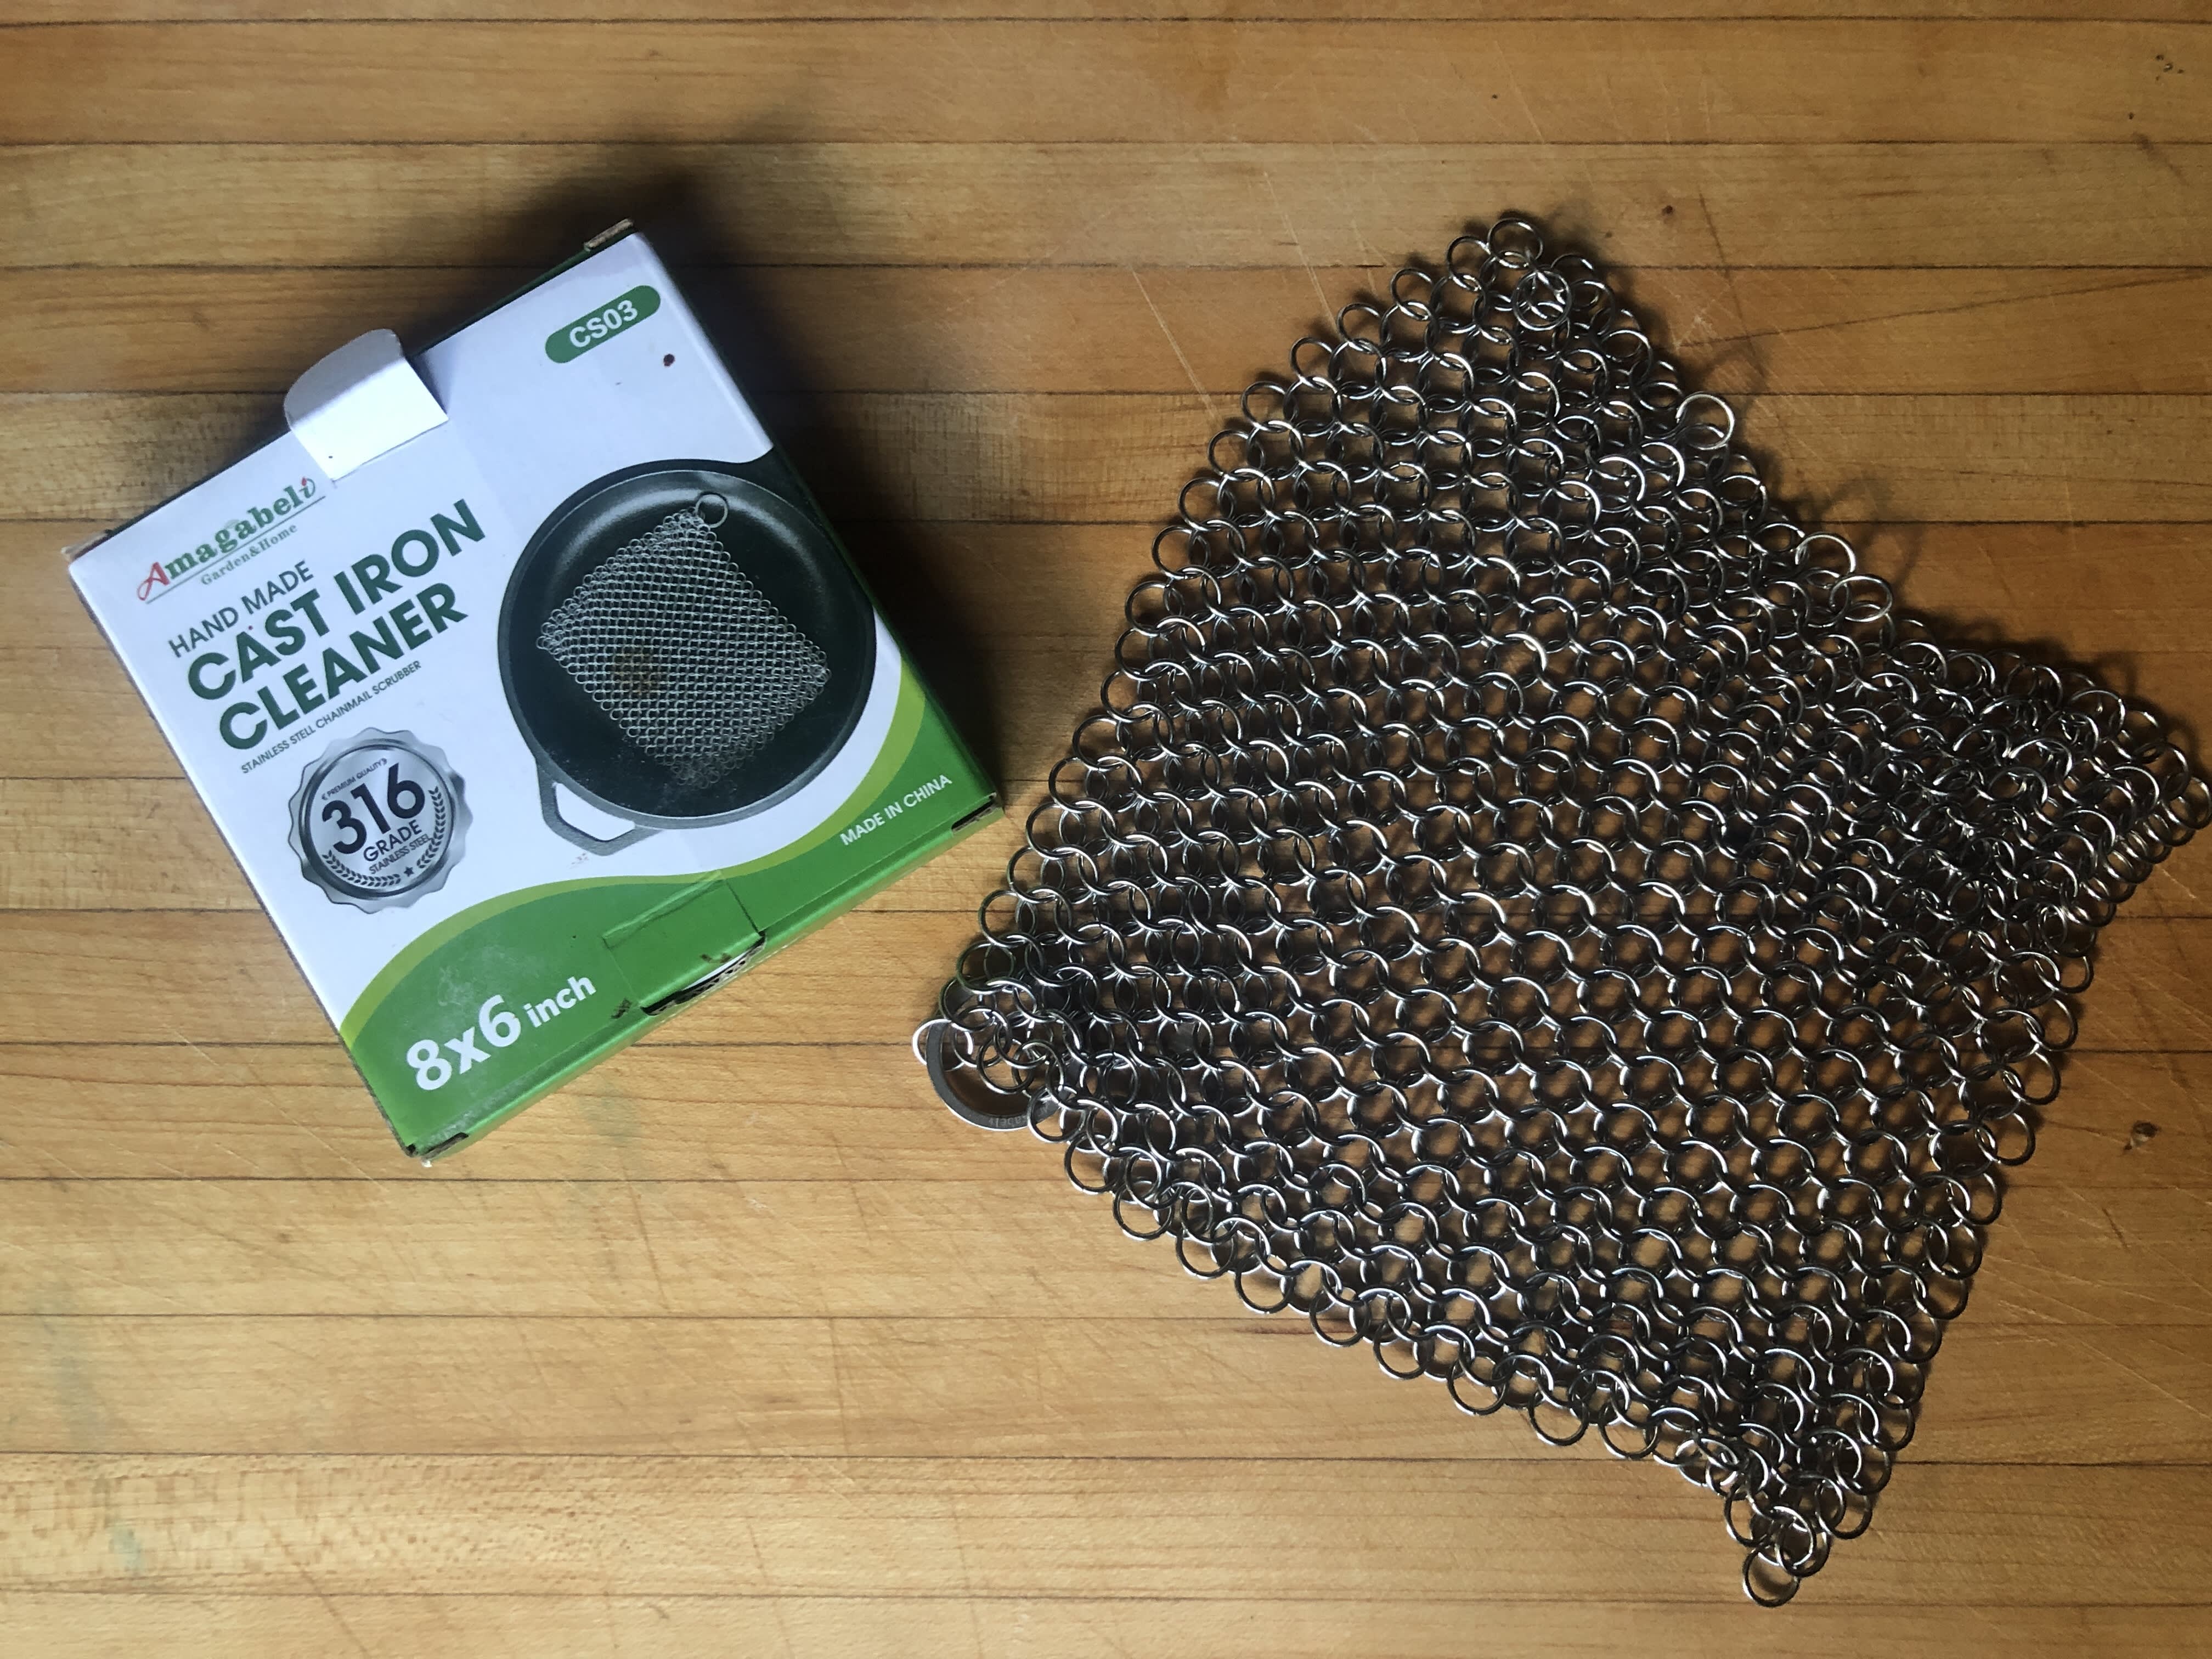 https://cdn.apartmenttherapy.info/image/upload/v1625755829/k/Edit/2021-07-Cast-Iron-Scrubbers/chainmail.jpg